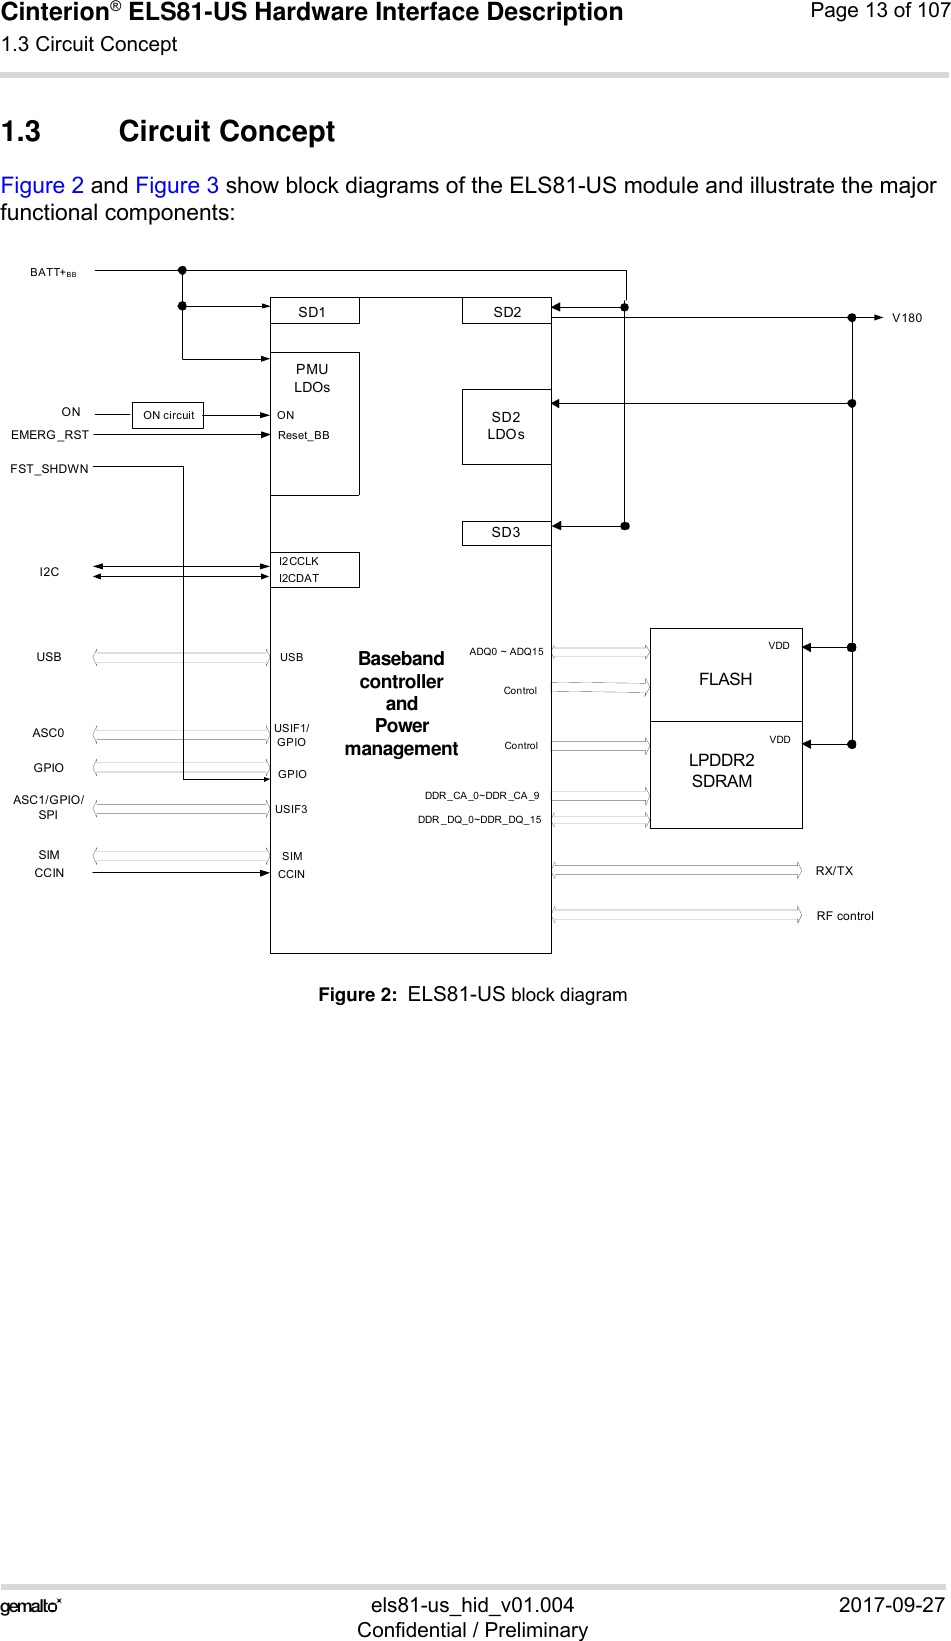 Cinterion® ELS81-US Hardware Interface Description1.3 Circuit Concept14els81-us_hid_v01.004 2017-09-27Confidential / PreliminaryPage 13 of 1071.3 Circuit ConceptFigure 2 and Figure 3 show block diagrams of the ELS81-US module and illustrate the major functional components:Figure 2:  ELS81-US block diagramSD1 SD2SD2 LDOsPMULDOsONReset_BBSD3I2CDATI2CCLKUSBGPIOSIMCCINLPDDR2SDRAMFLASHVDDVDDADQ0 ~ ADQ15DDR_CA _0~DDR _CA _9DDR _DQ_0~DDR _DQ_15ControlControlCCINSIMGPIOASC0USBI2CON circuitONEMERG _RSTBATT+BBRX/TXRF controlV180Baseband controller and Power managementUSIF1/GPIOFST_SHDWNASC1/GPIO/SPI USIF3